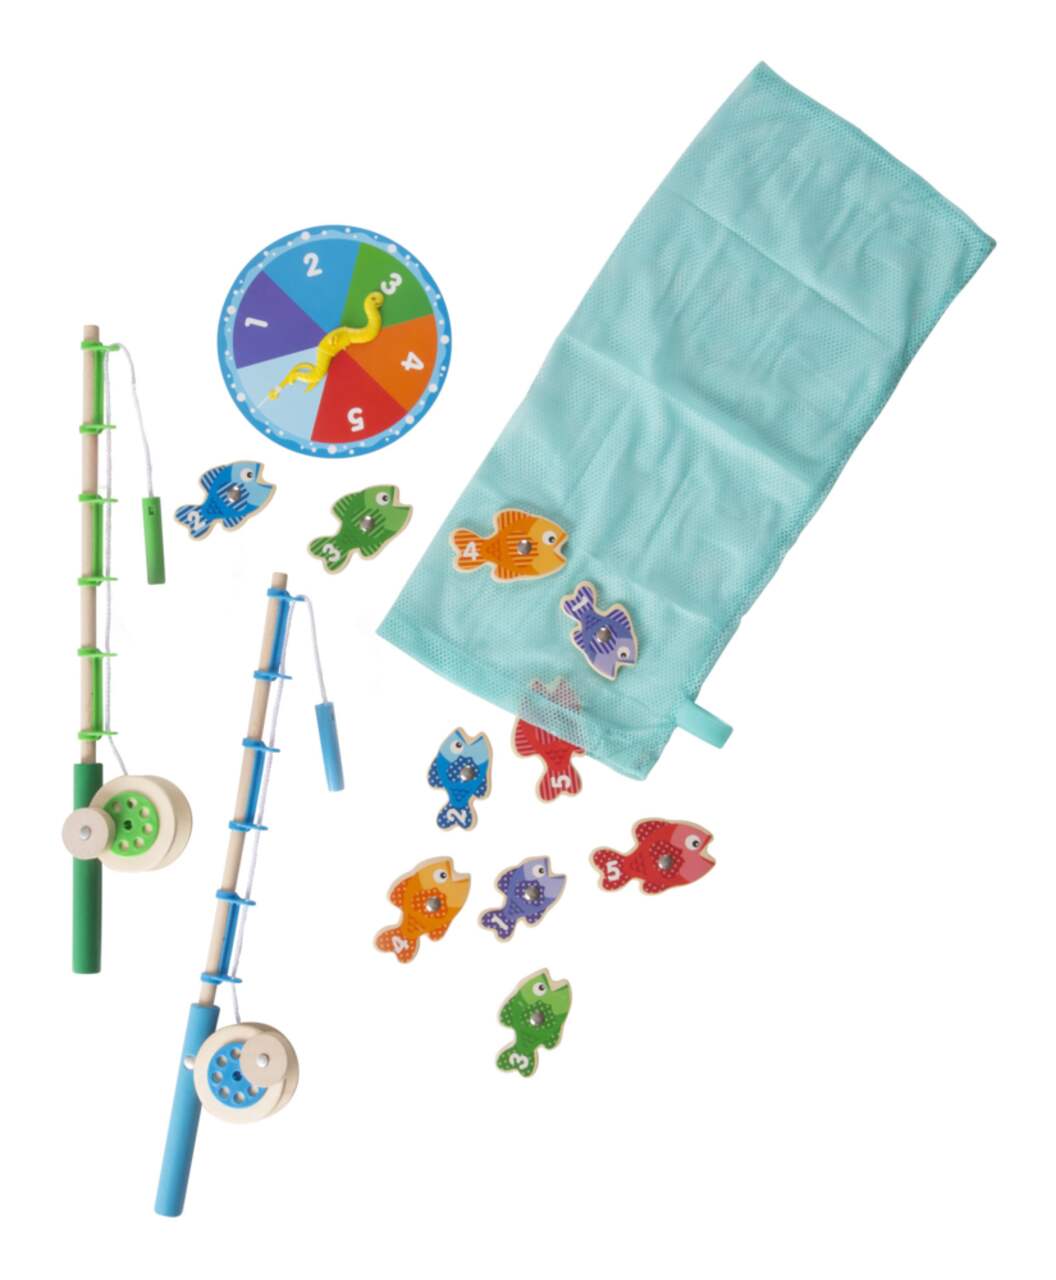 https://media-www.canadiantire.ca/product/seasonal-gardening/toys/preschool-toys-activities/0506399/-melissa-doug-catch-and-count-fishing-game-bb5b42c4-e15b-44bd-94cb-df68d4202cc9.png?imdensity=1&imwidth=1244&impolicy=mZoom